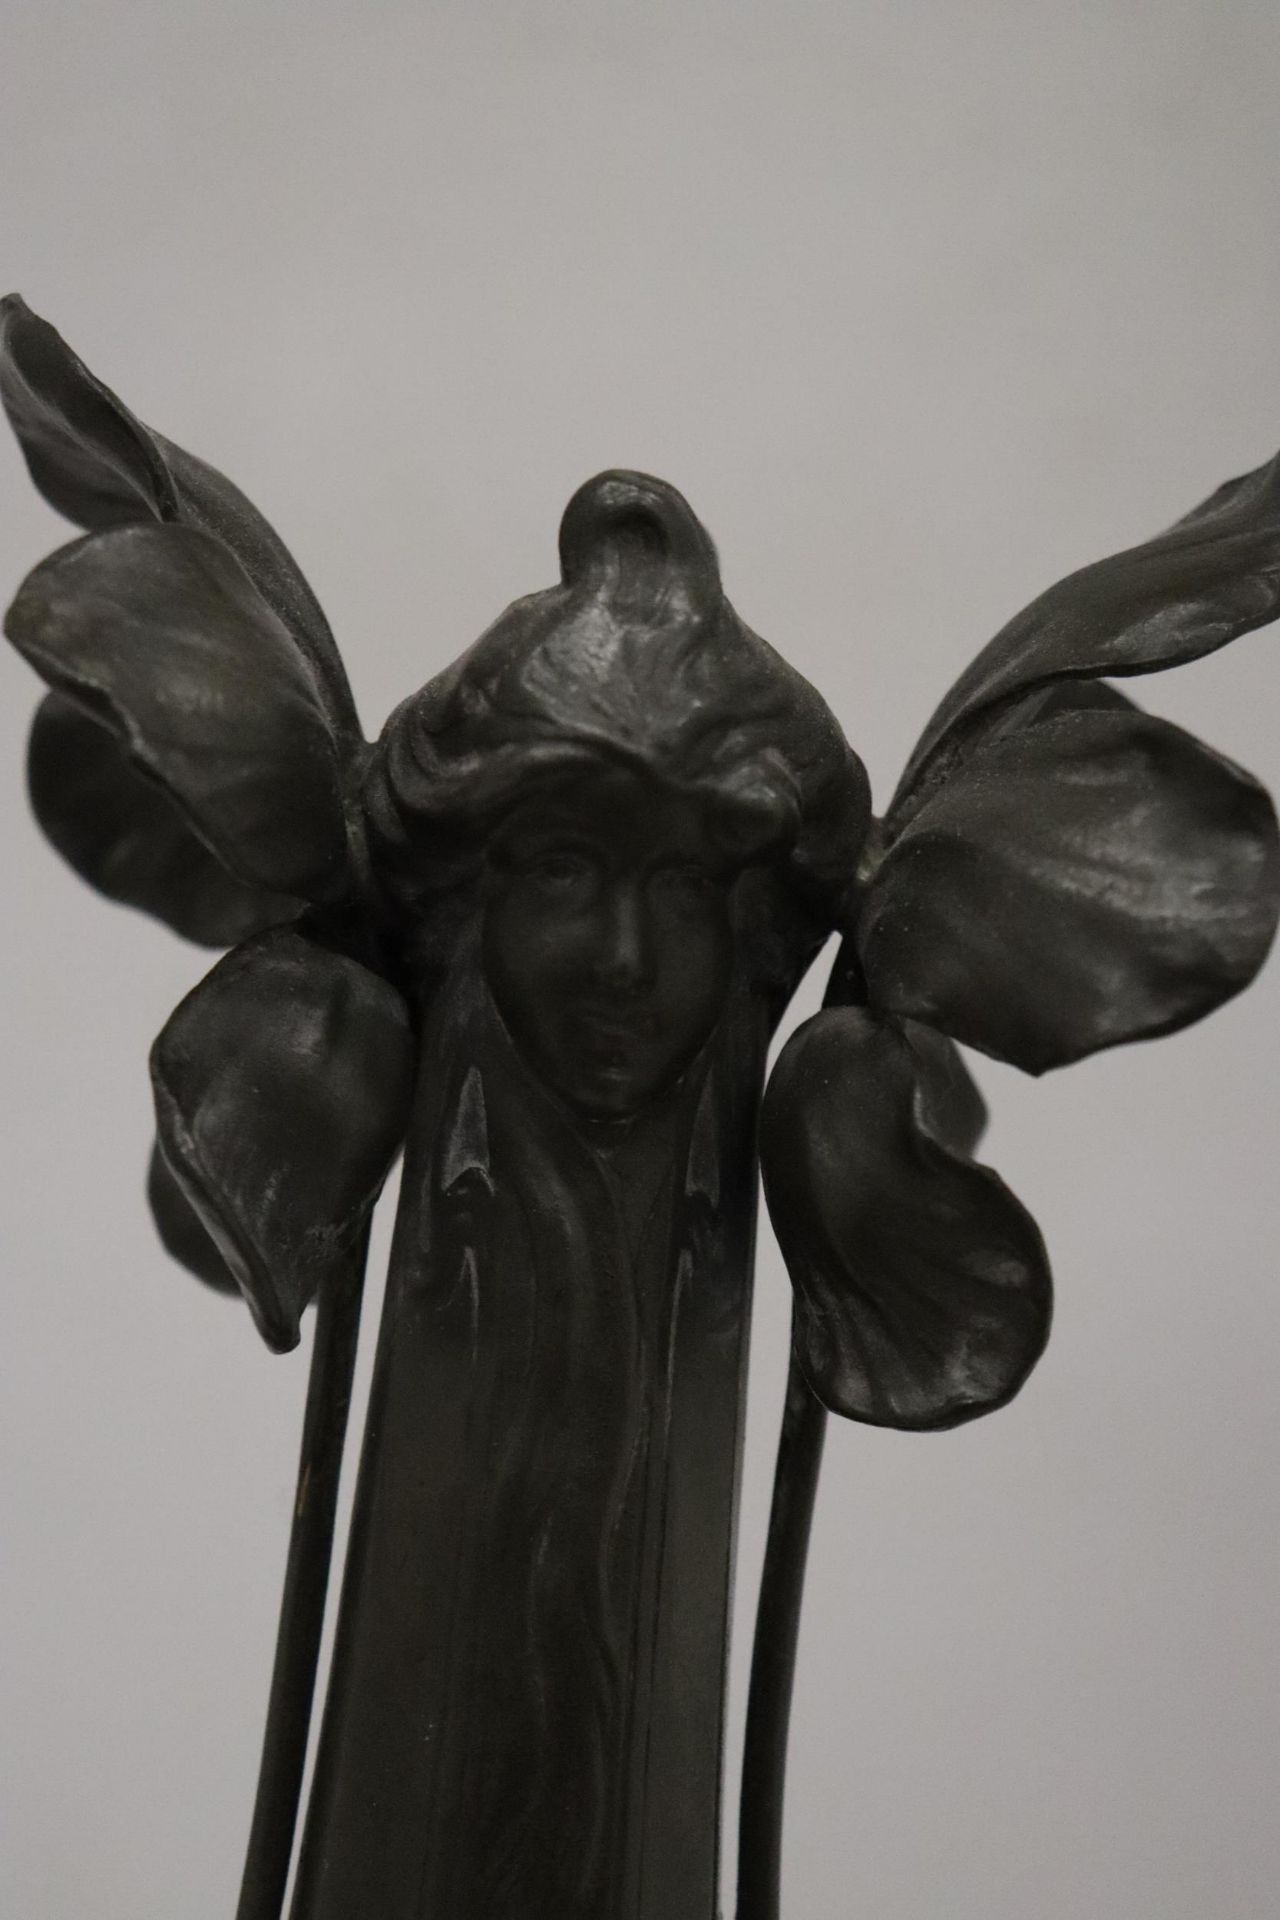 AN IMPERIAL ZINN B & G PEWTER VASE IN AN ART NOUVEAU STYLE - Image 2 of 8